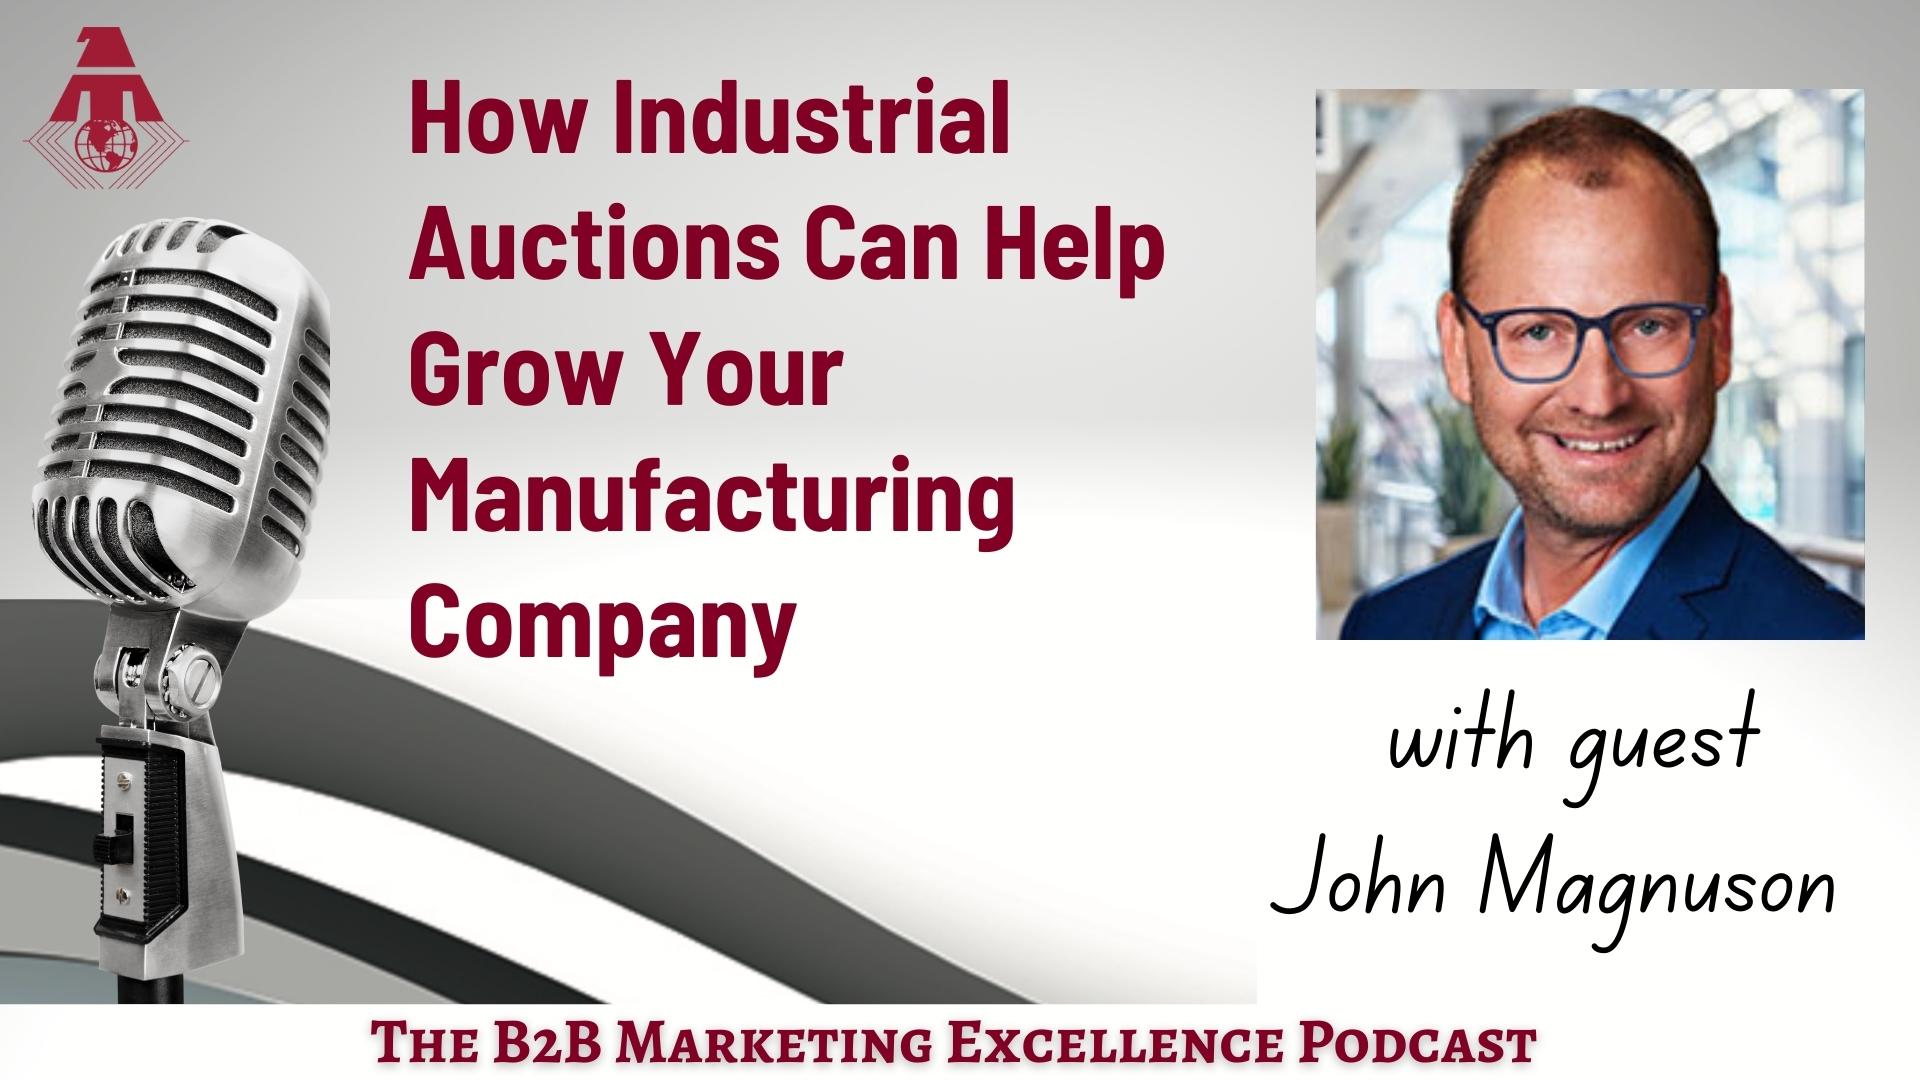 Industrial Auctions can help Manufacturing Companies